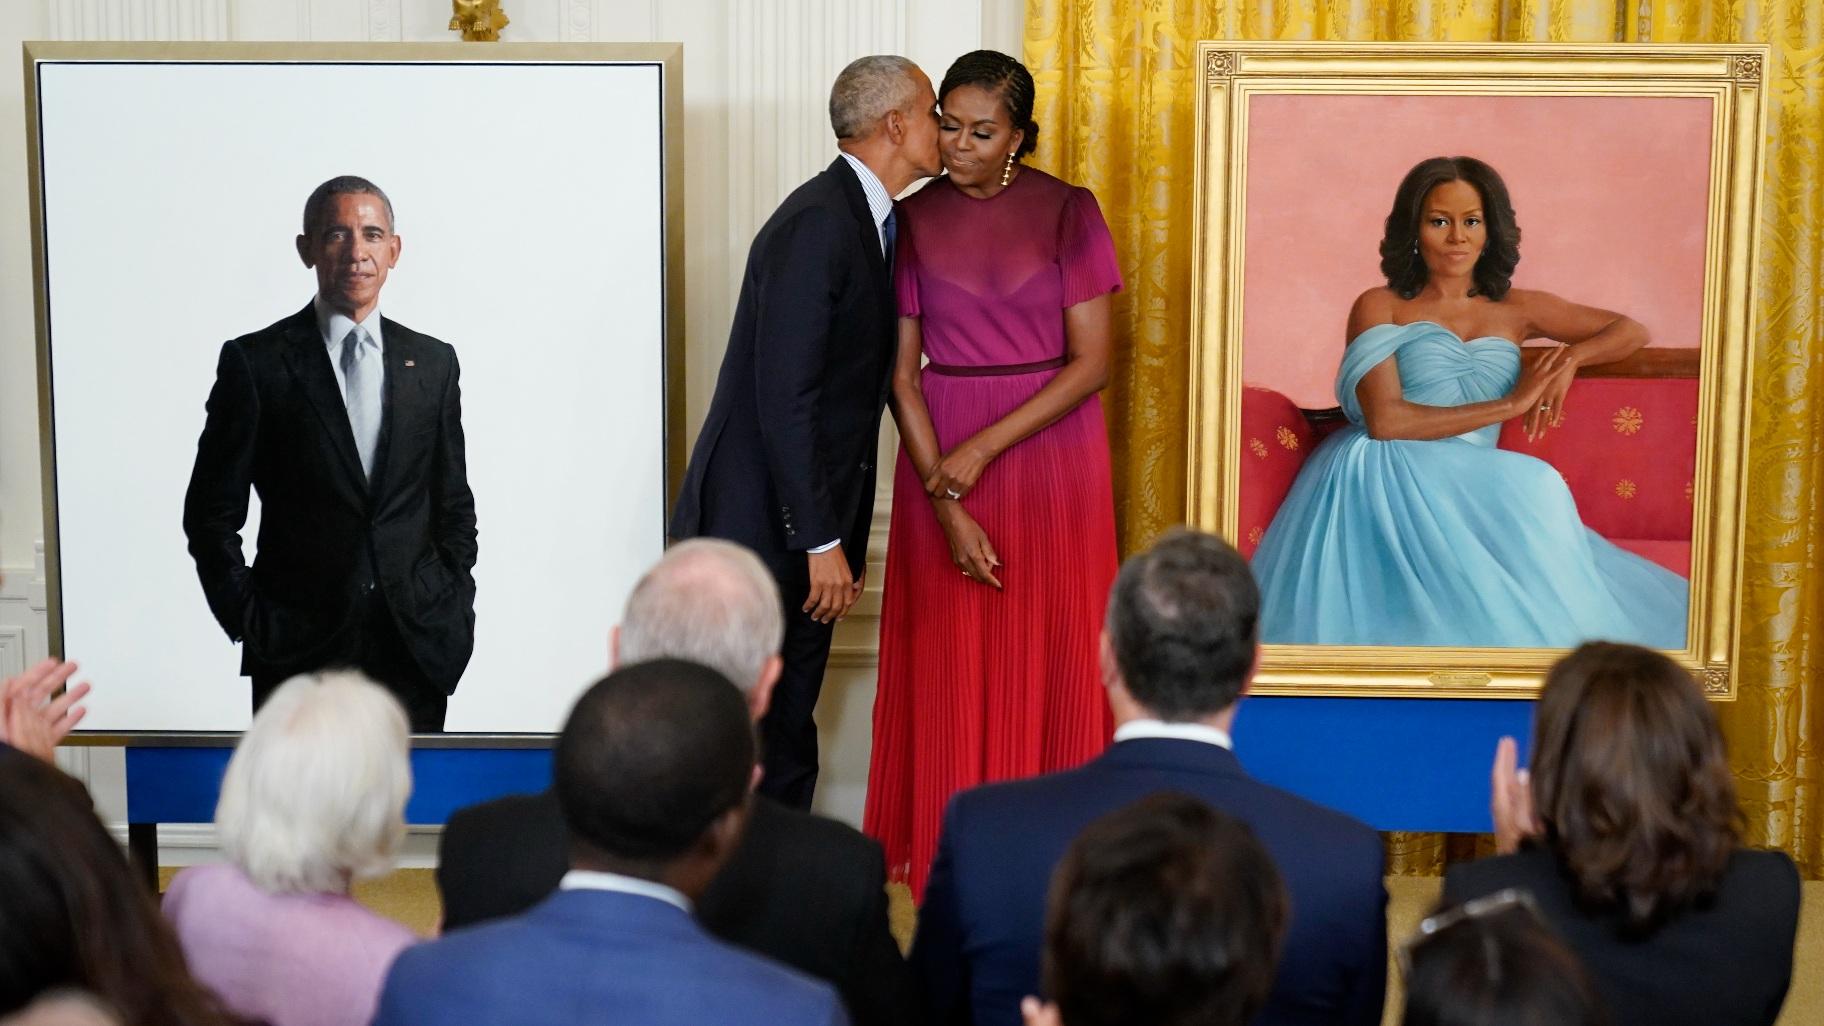 Former President Barack Obama looks at his official White House portrait with former first lady Michelle Obama during a ceremony in the East Room of the White House, Wednesday, Sept. 7, 2022, in Washington. (AP Photo / Andrew Harnik)